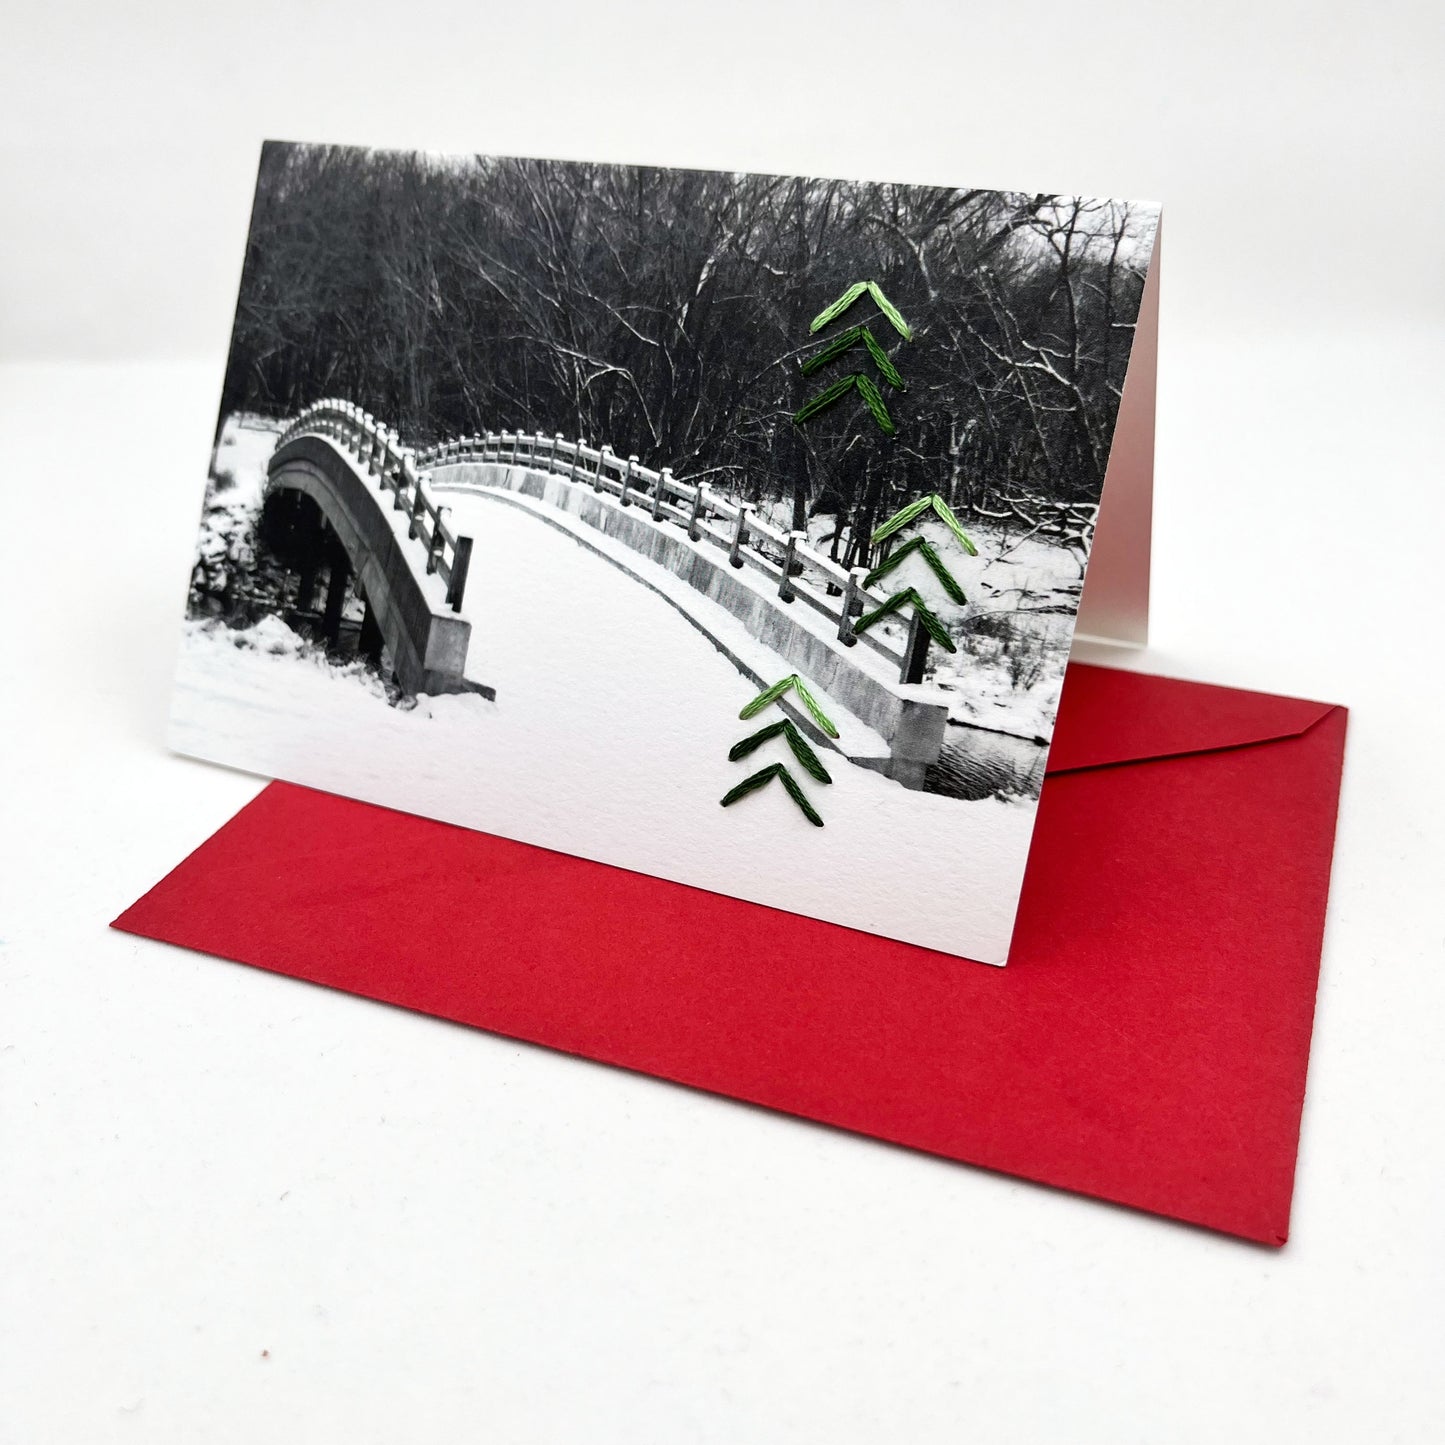 Greeting card standing upright on an envelope. Photo of snow covered bridge. Green stitches of groups of 3 chevrons to create abstract pine tree shape